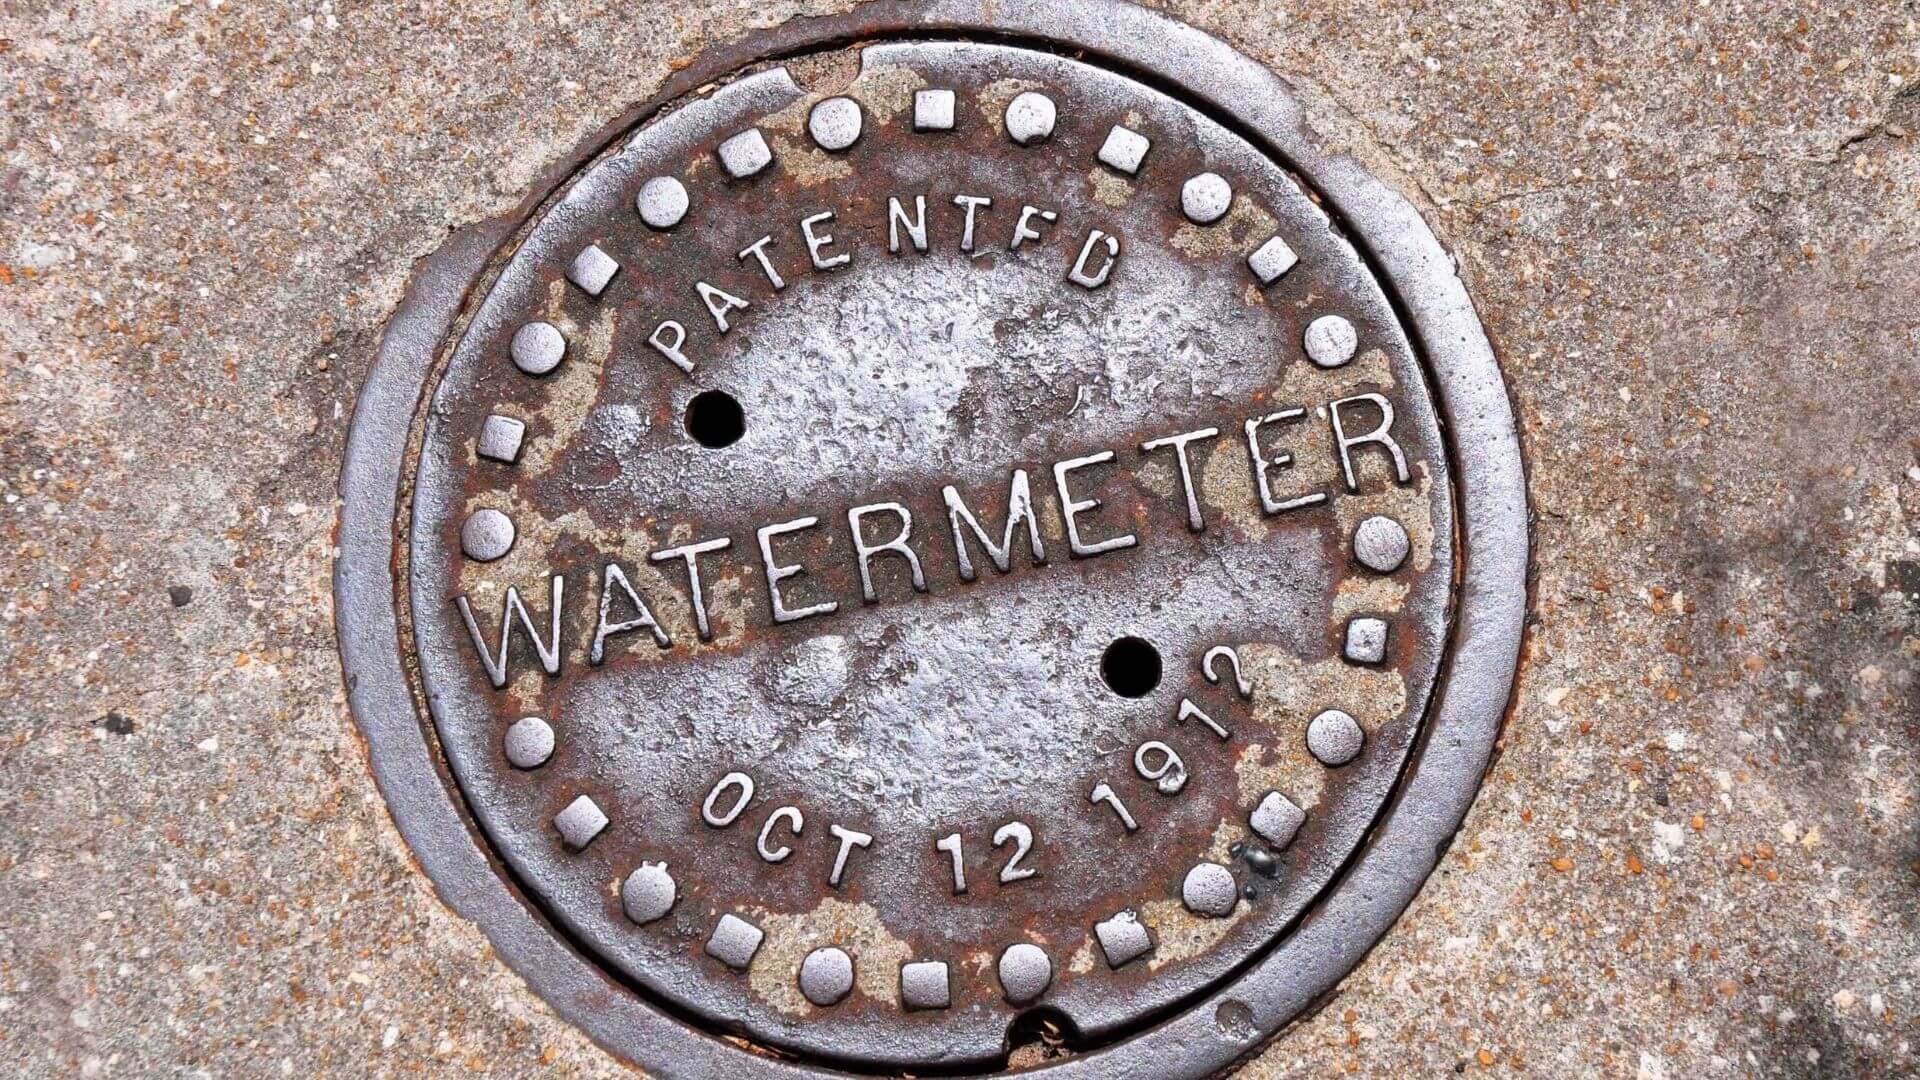 Water Meter Cover In Concrete